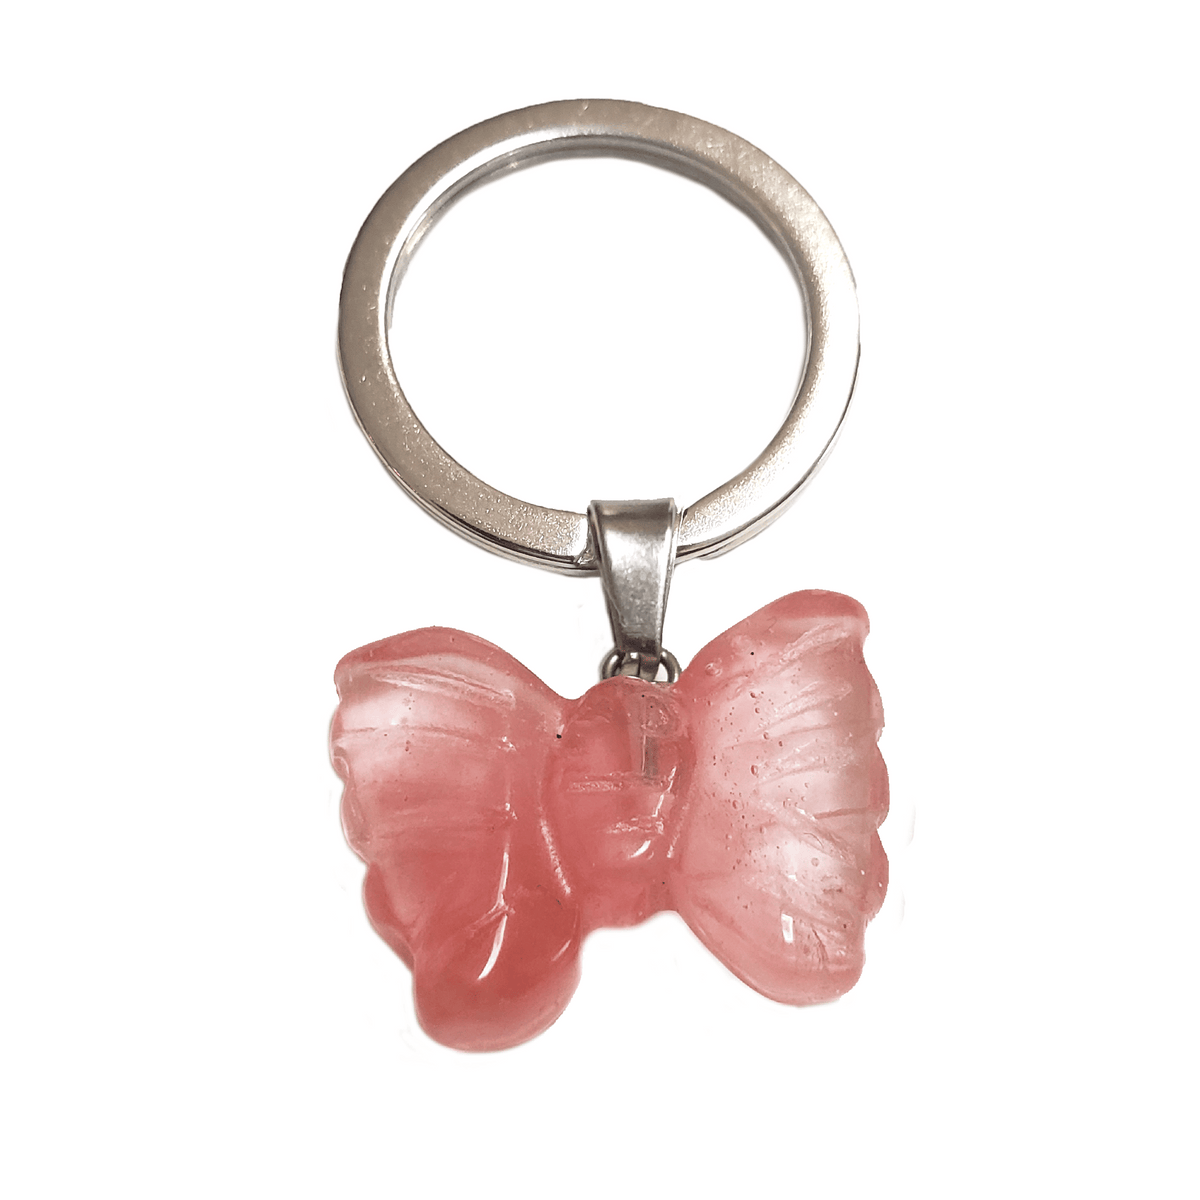 Butterfly Blessings Keepsake Candle - Pet Memorial Candle- - Watermelon Stone Butterfly Keychain